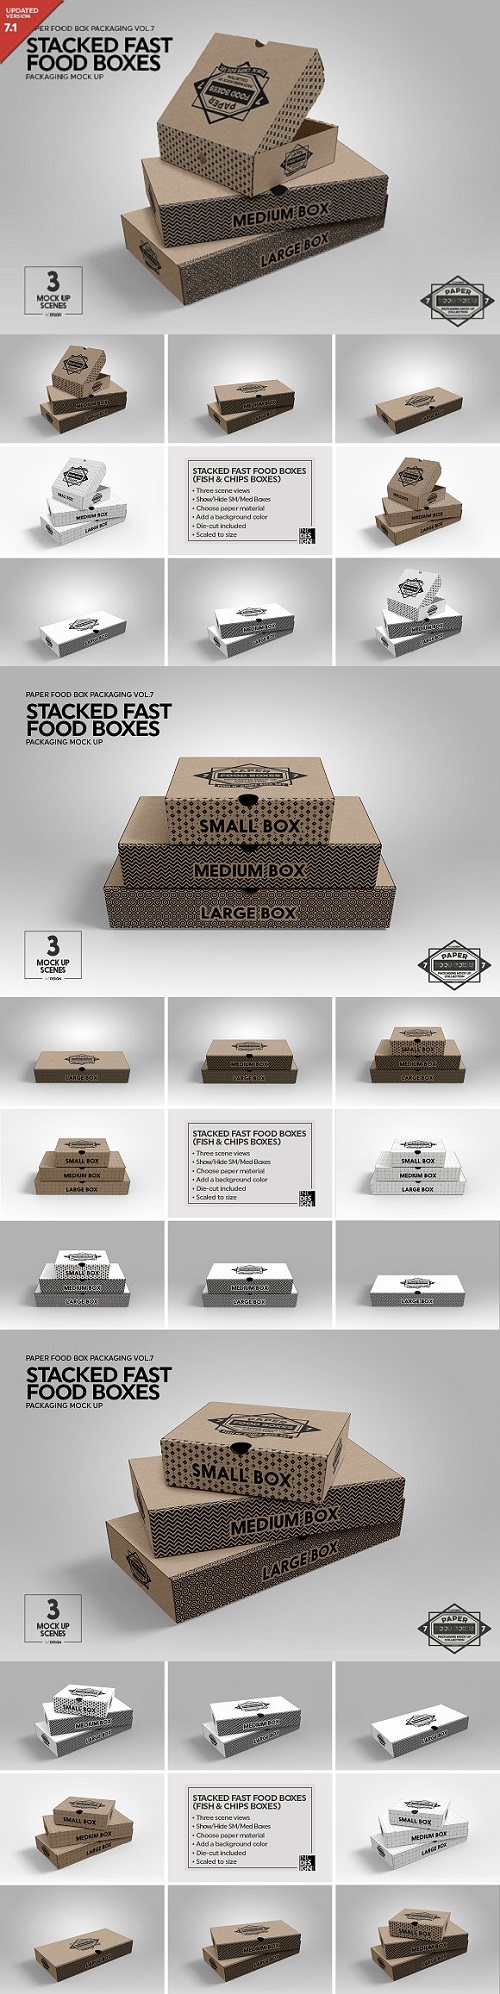 Stacked Fast Food Boxes MockUp 1931891